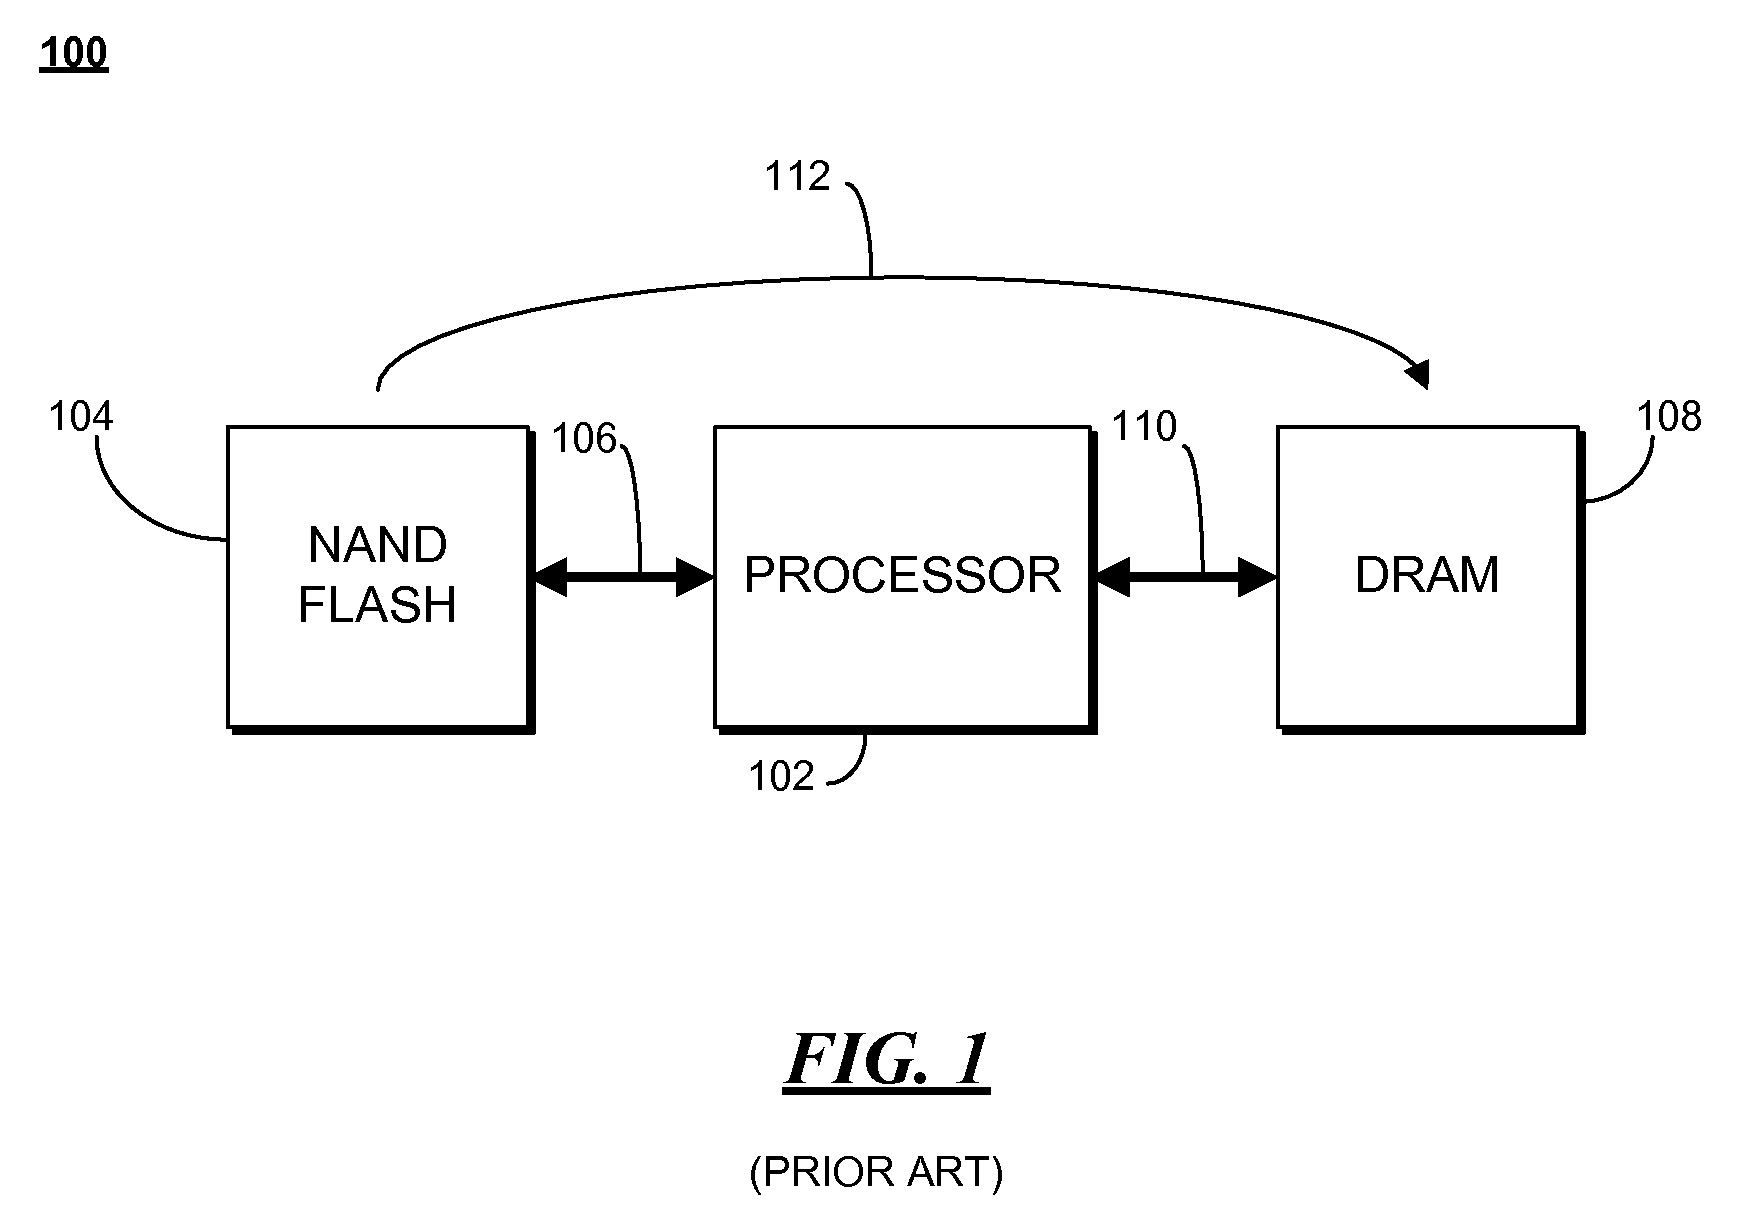 Method and apparatus for fast booting a portable computing device allowing for immediate operation